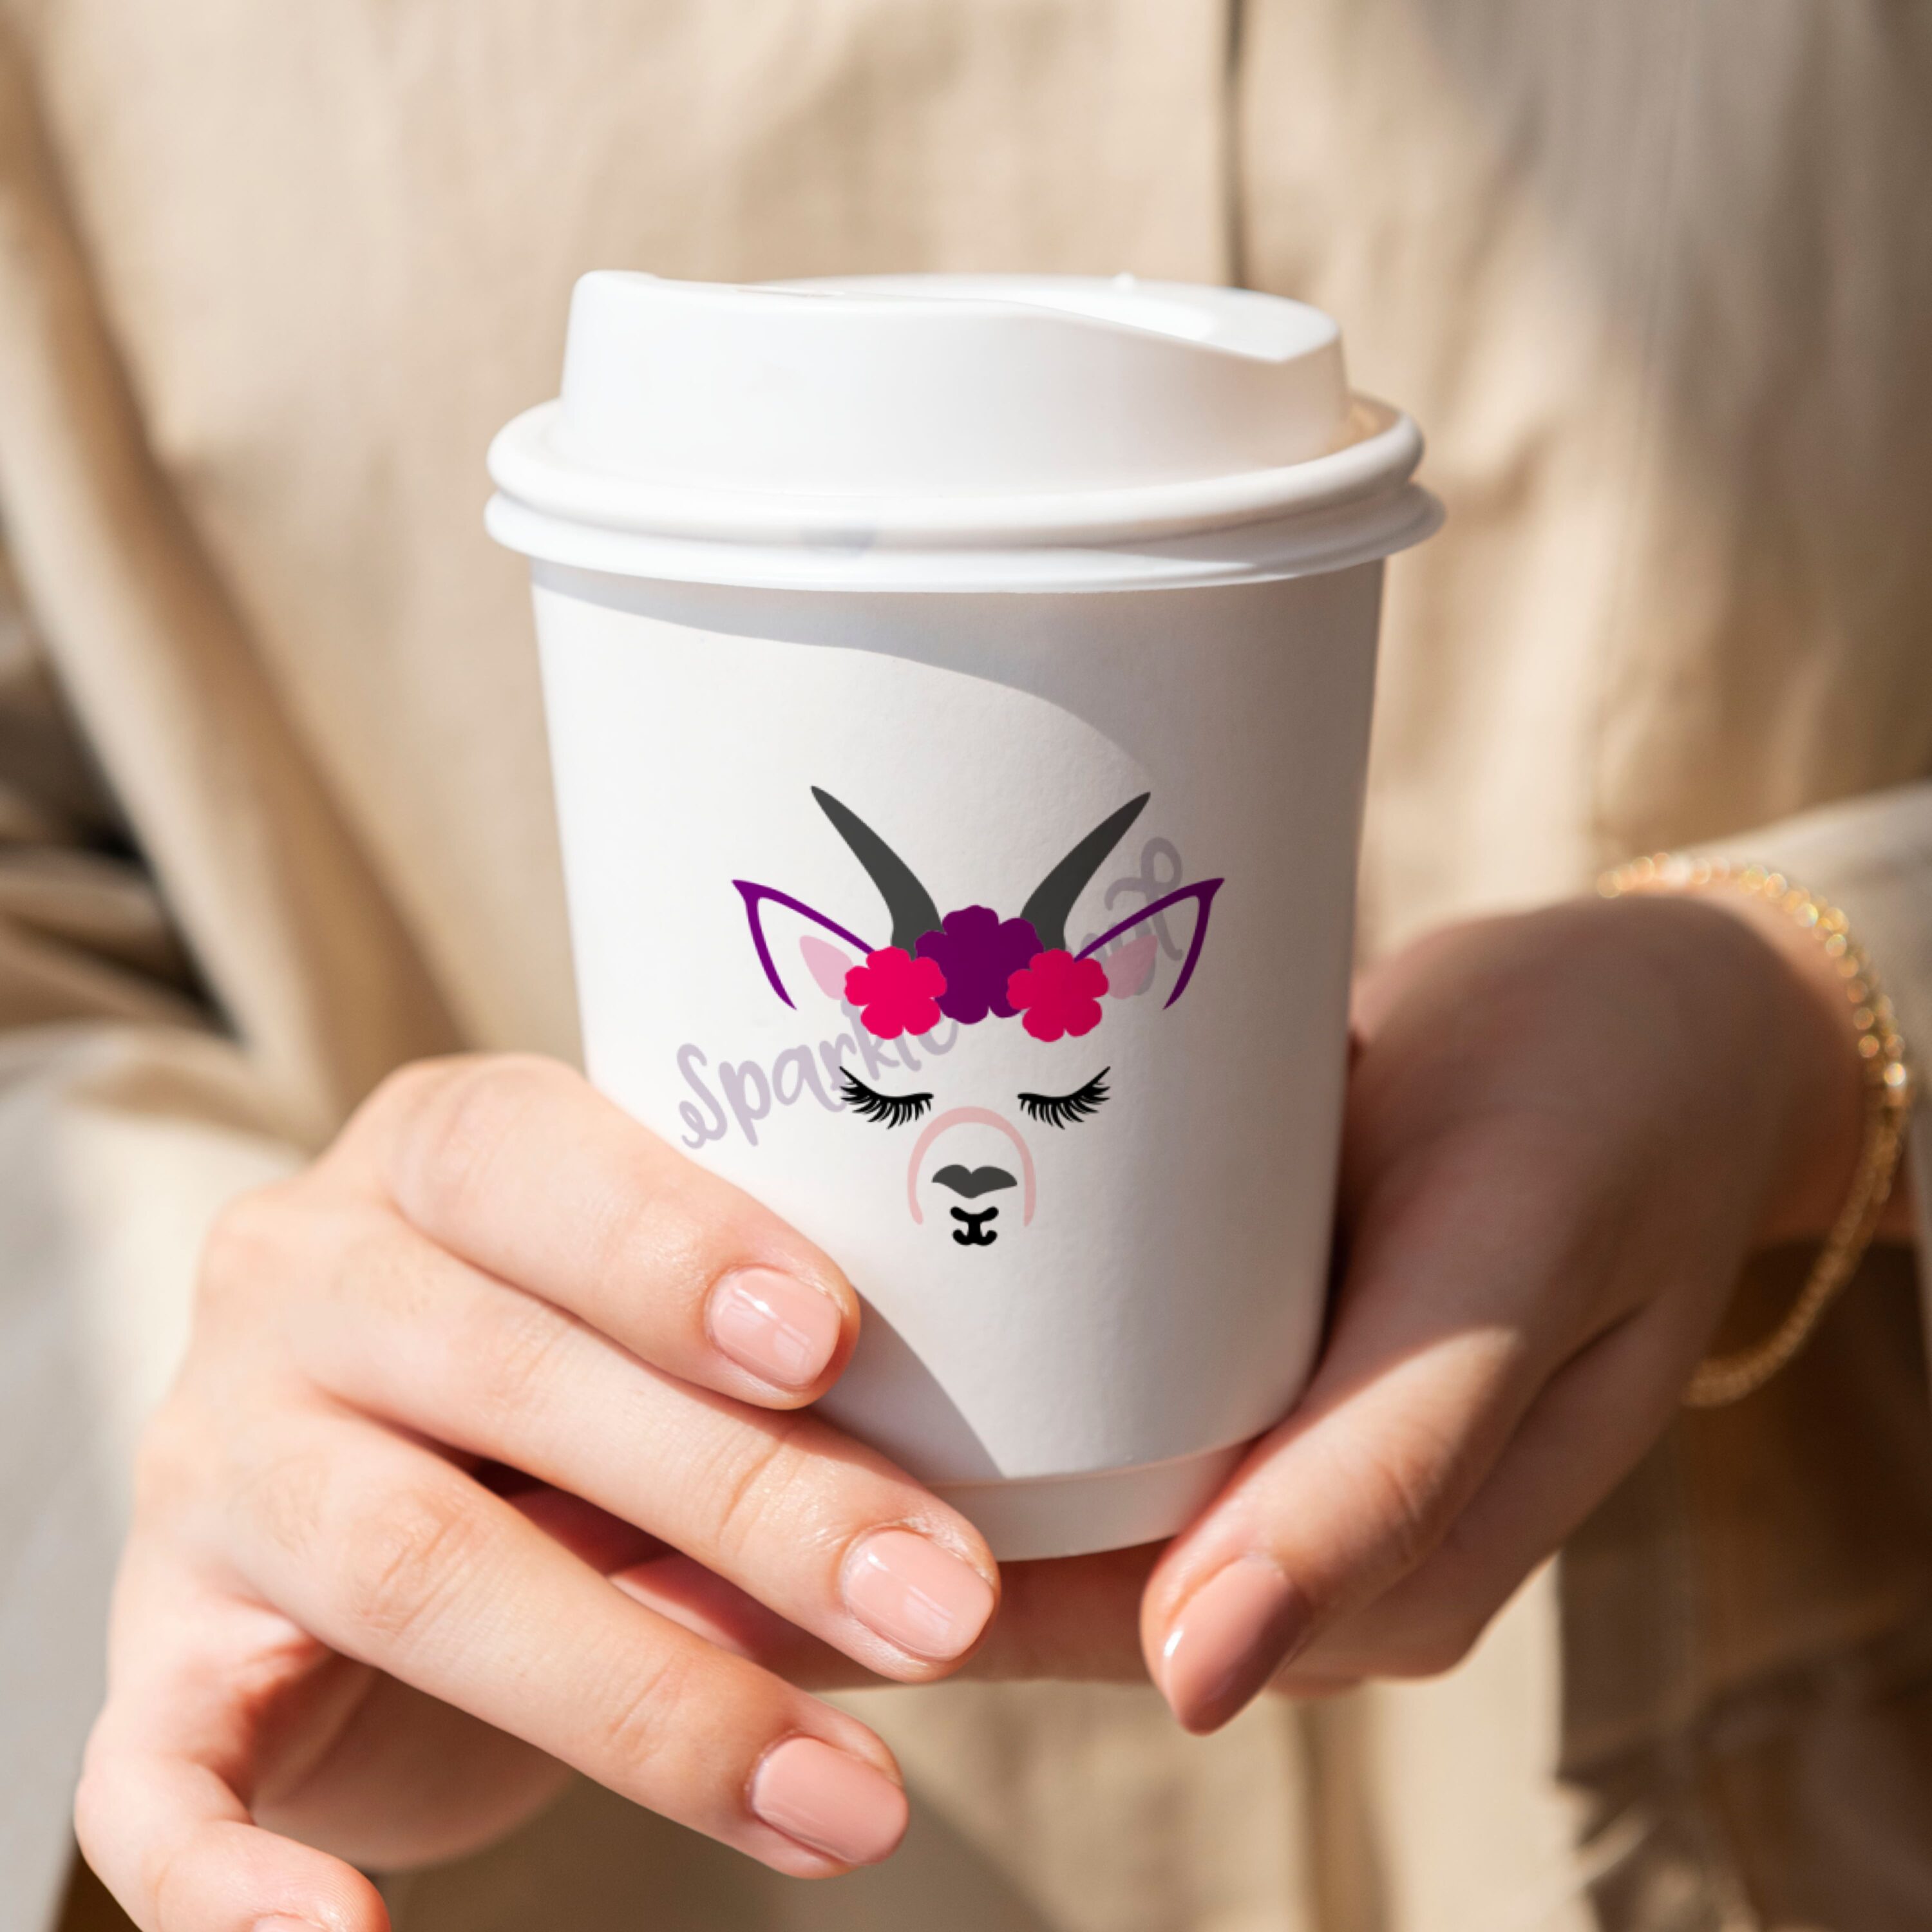 Woman holding a cup with a unicorn face on it.